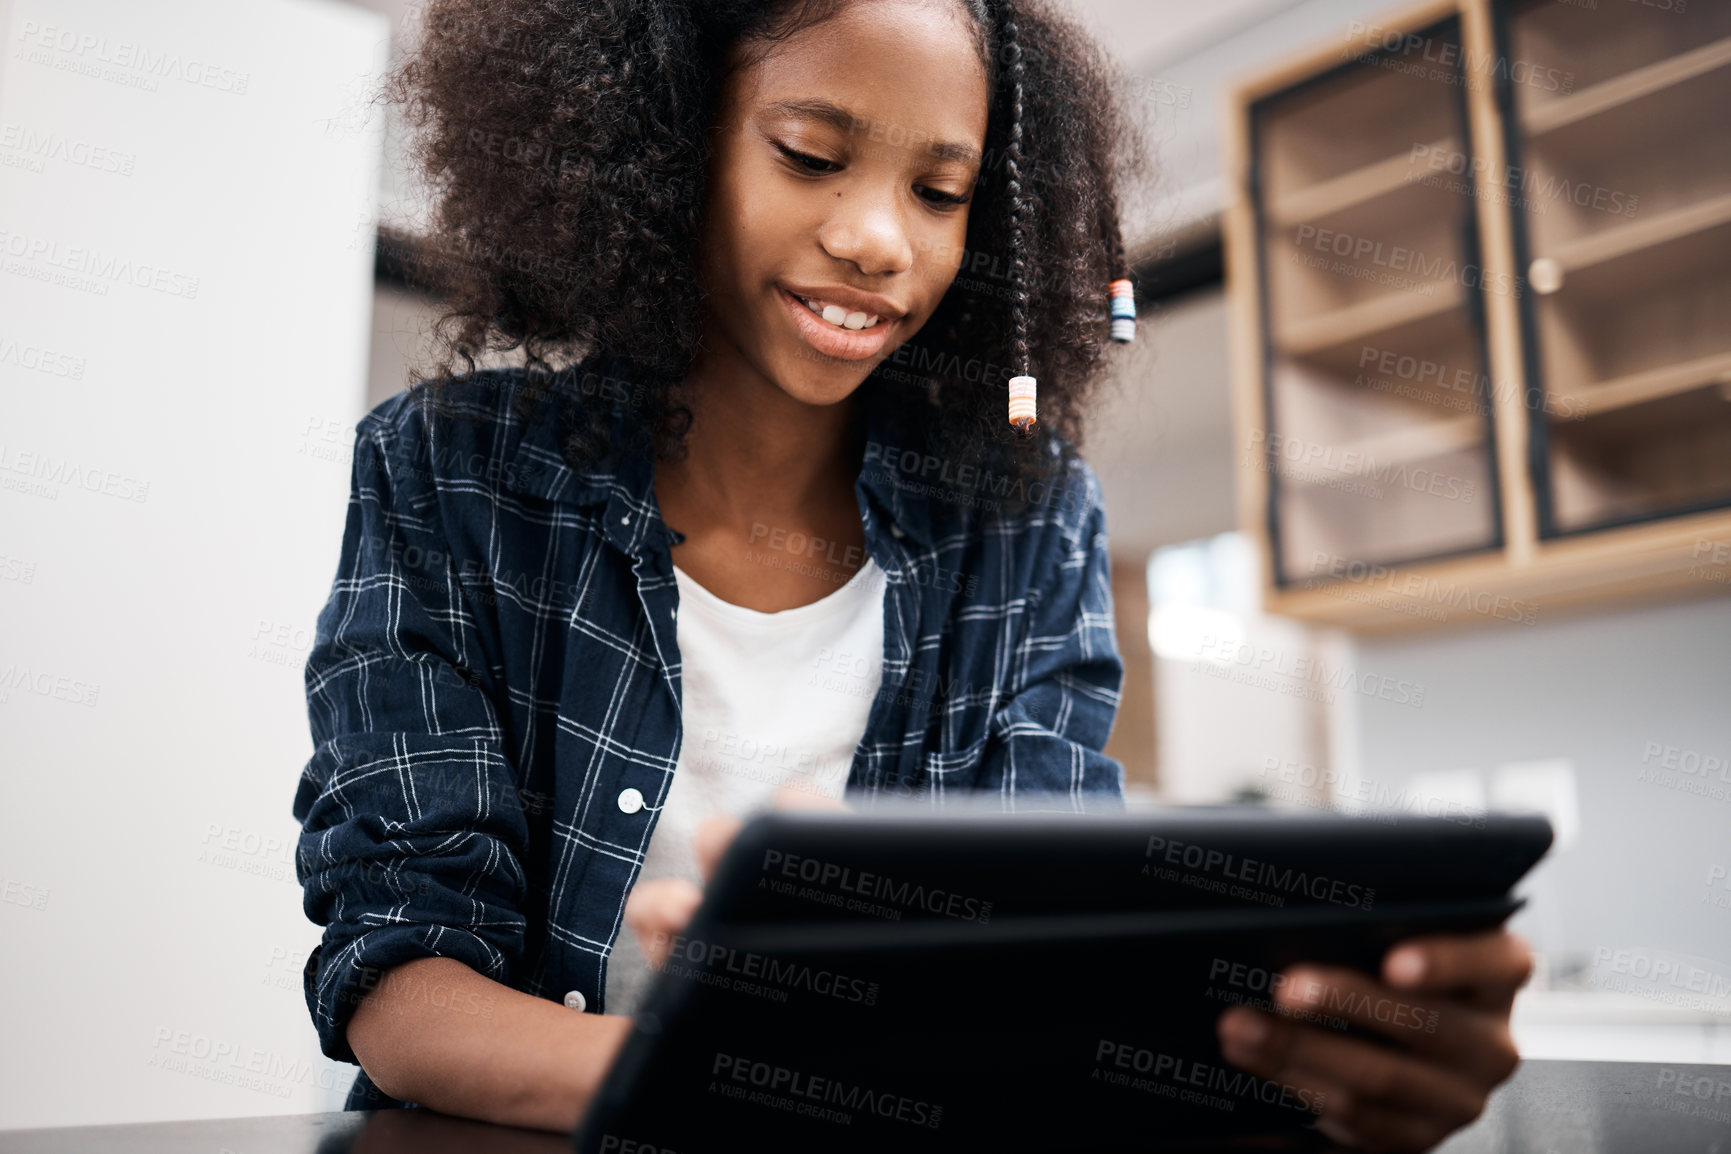 Buy stock photo Shot of a young girl using a digital tablet while doing a school assignment at home